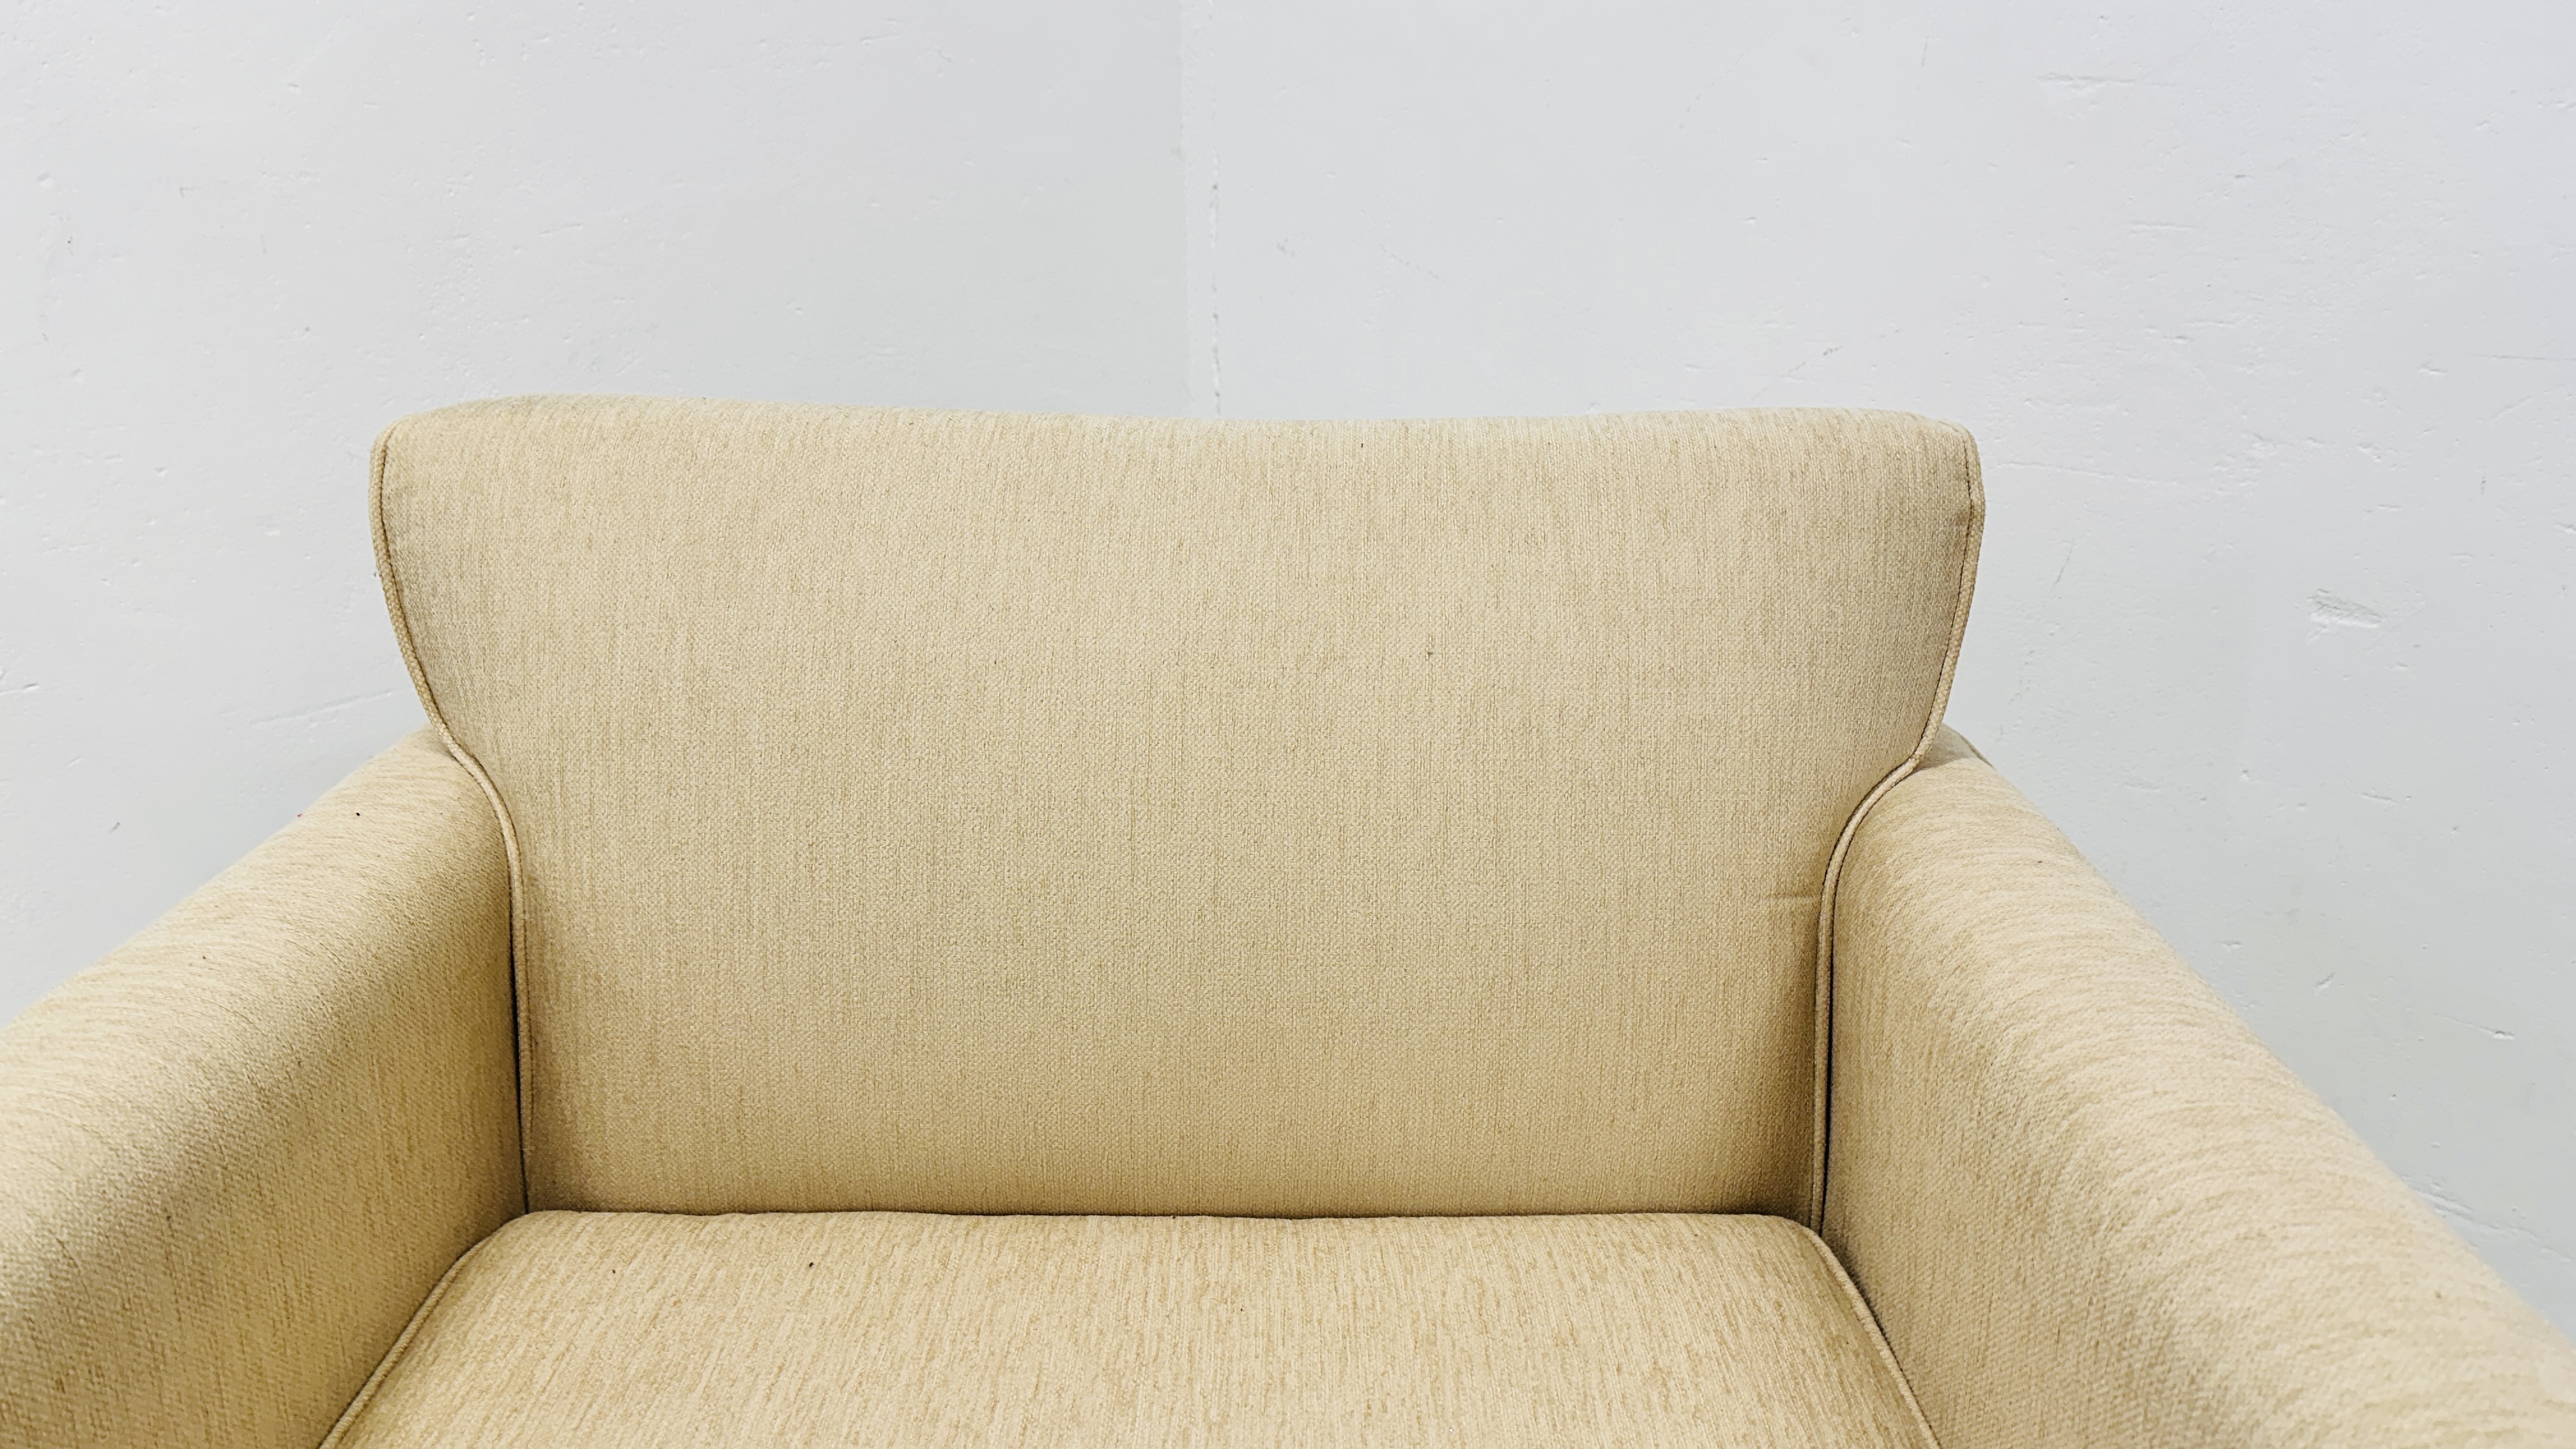 CREAM UPHOLSTERED ARM CHAIR / SOFA BED. - Image 8 of 12